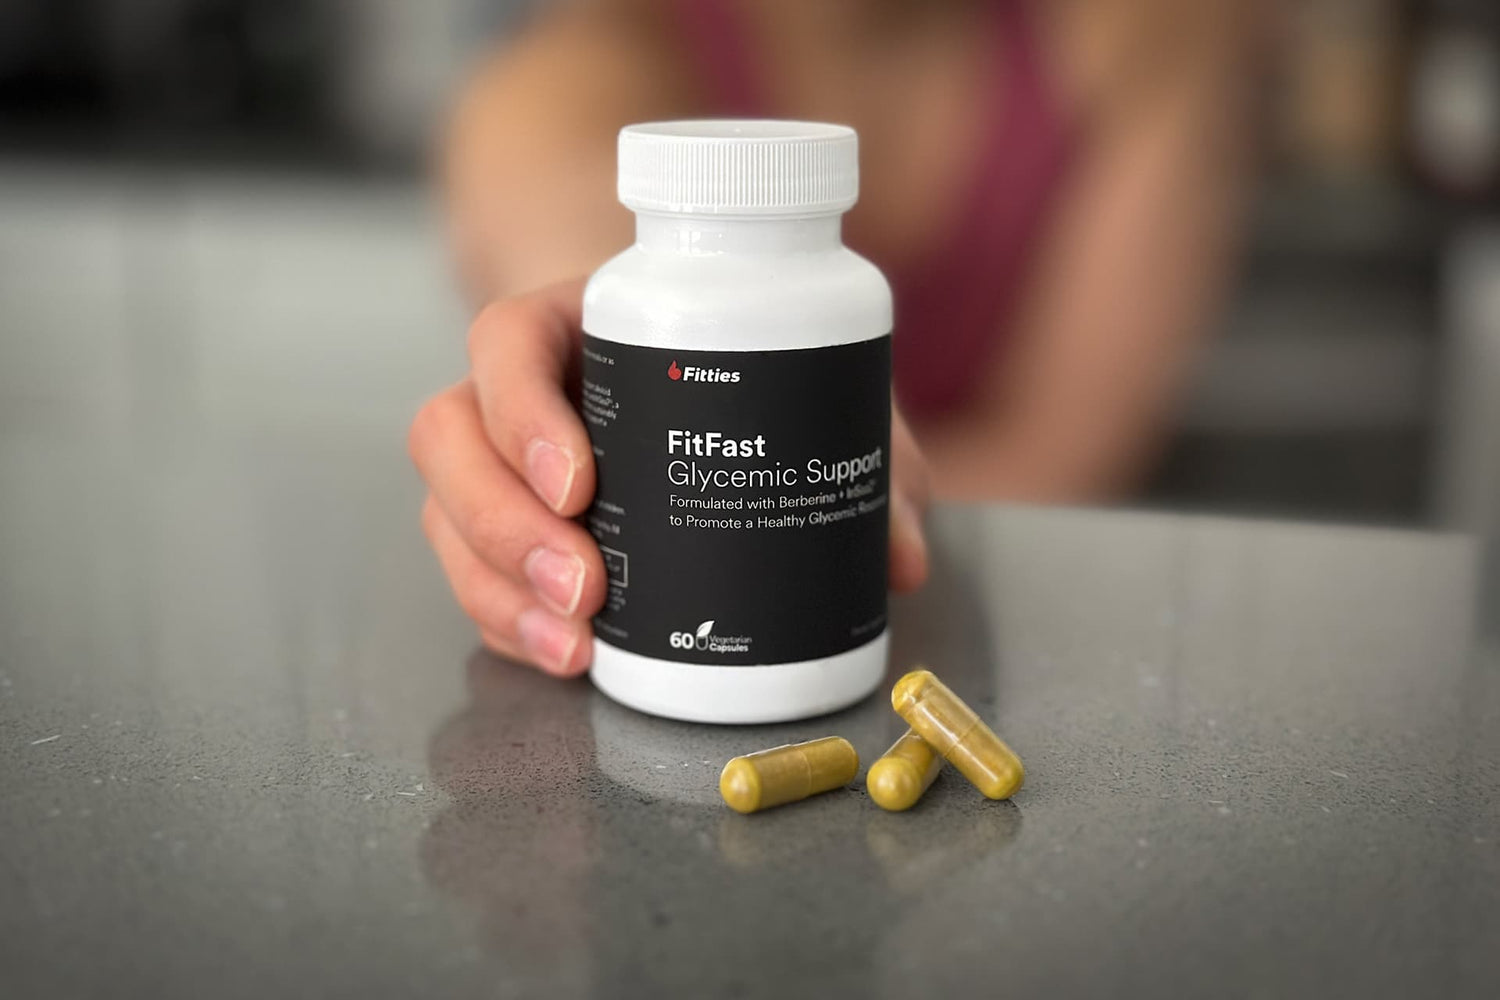 Closeup of FitFast bottle and capsules on kitchen counter